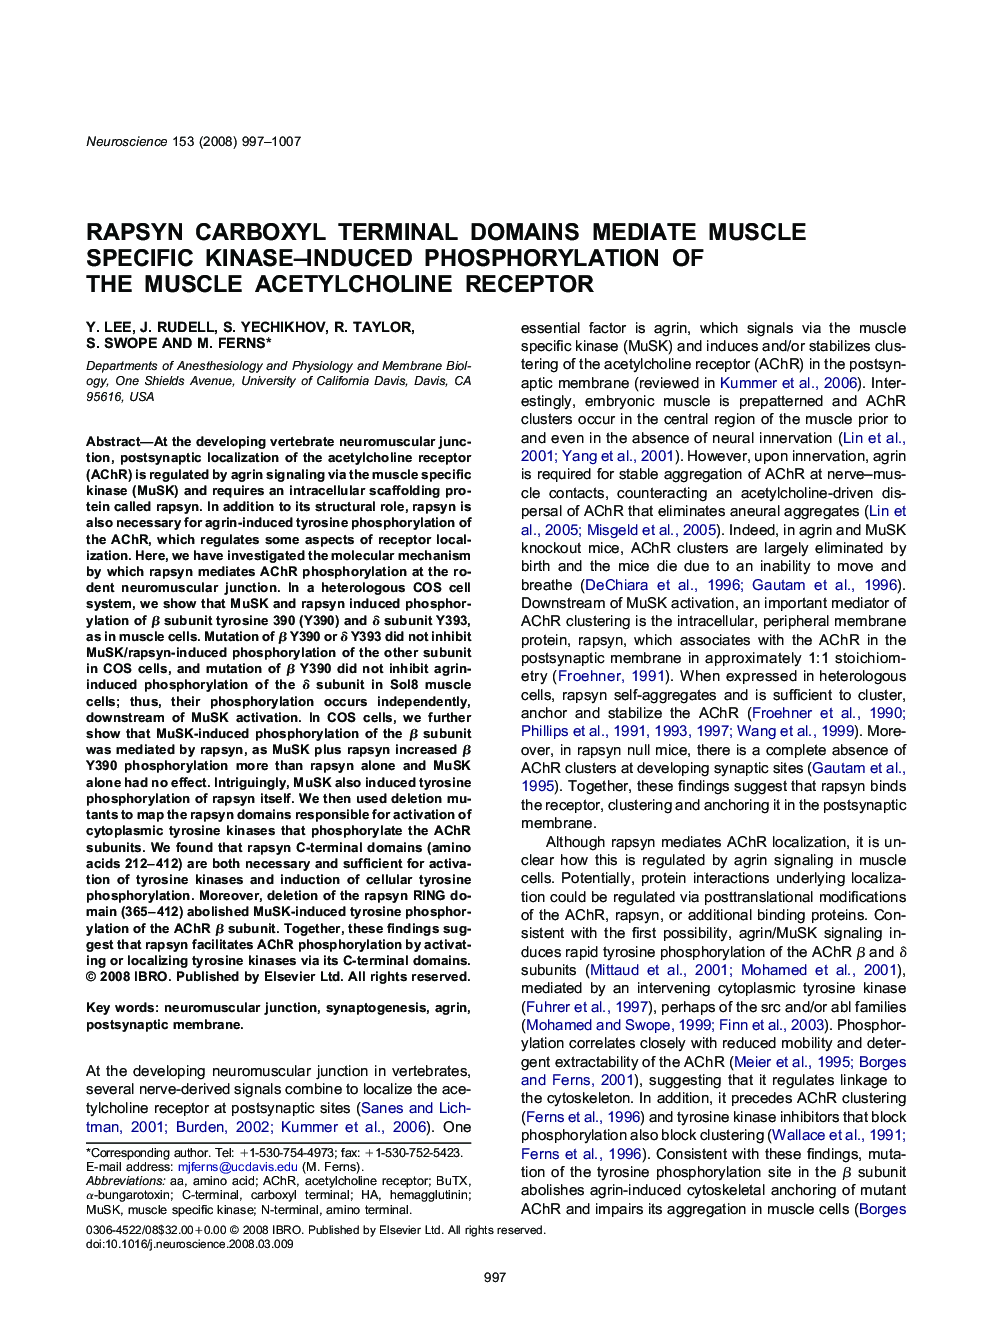 Rapsyn carboxyl terminal domains mediate muscle specific kinase–induced phosphorylation of the muscle acetylcholine receptor